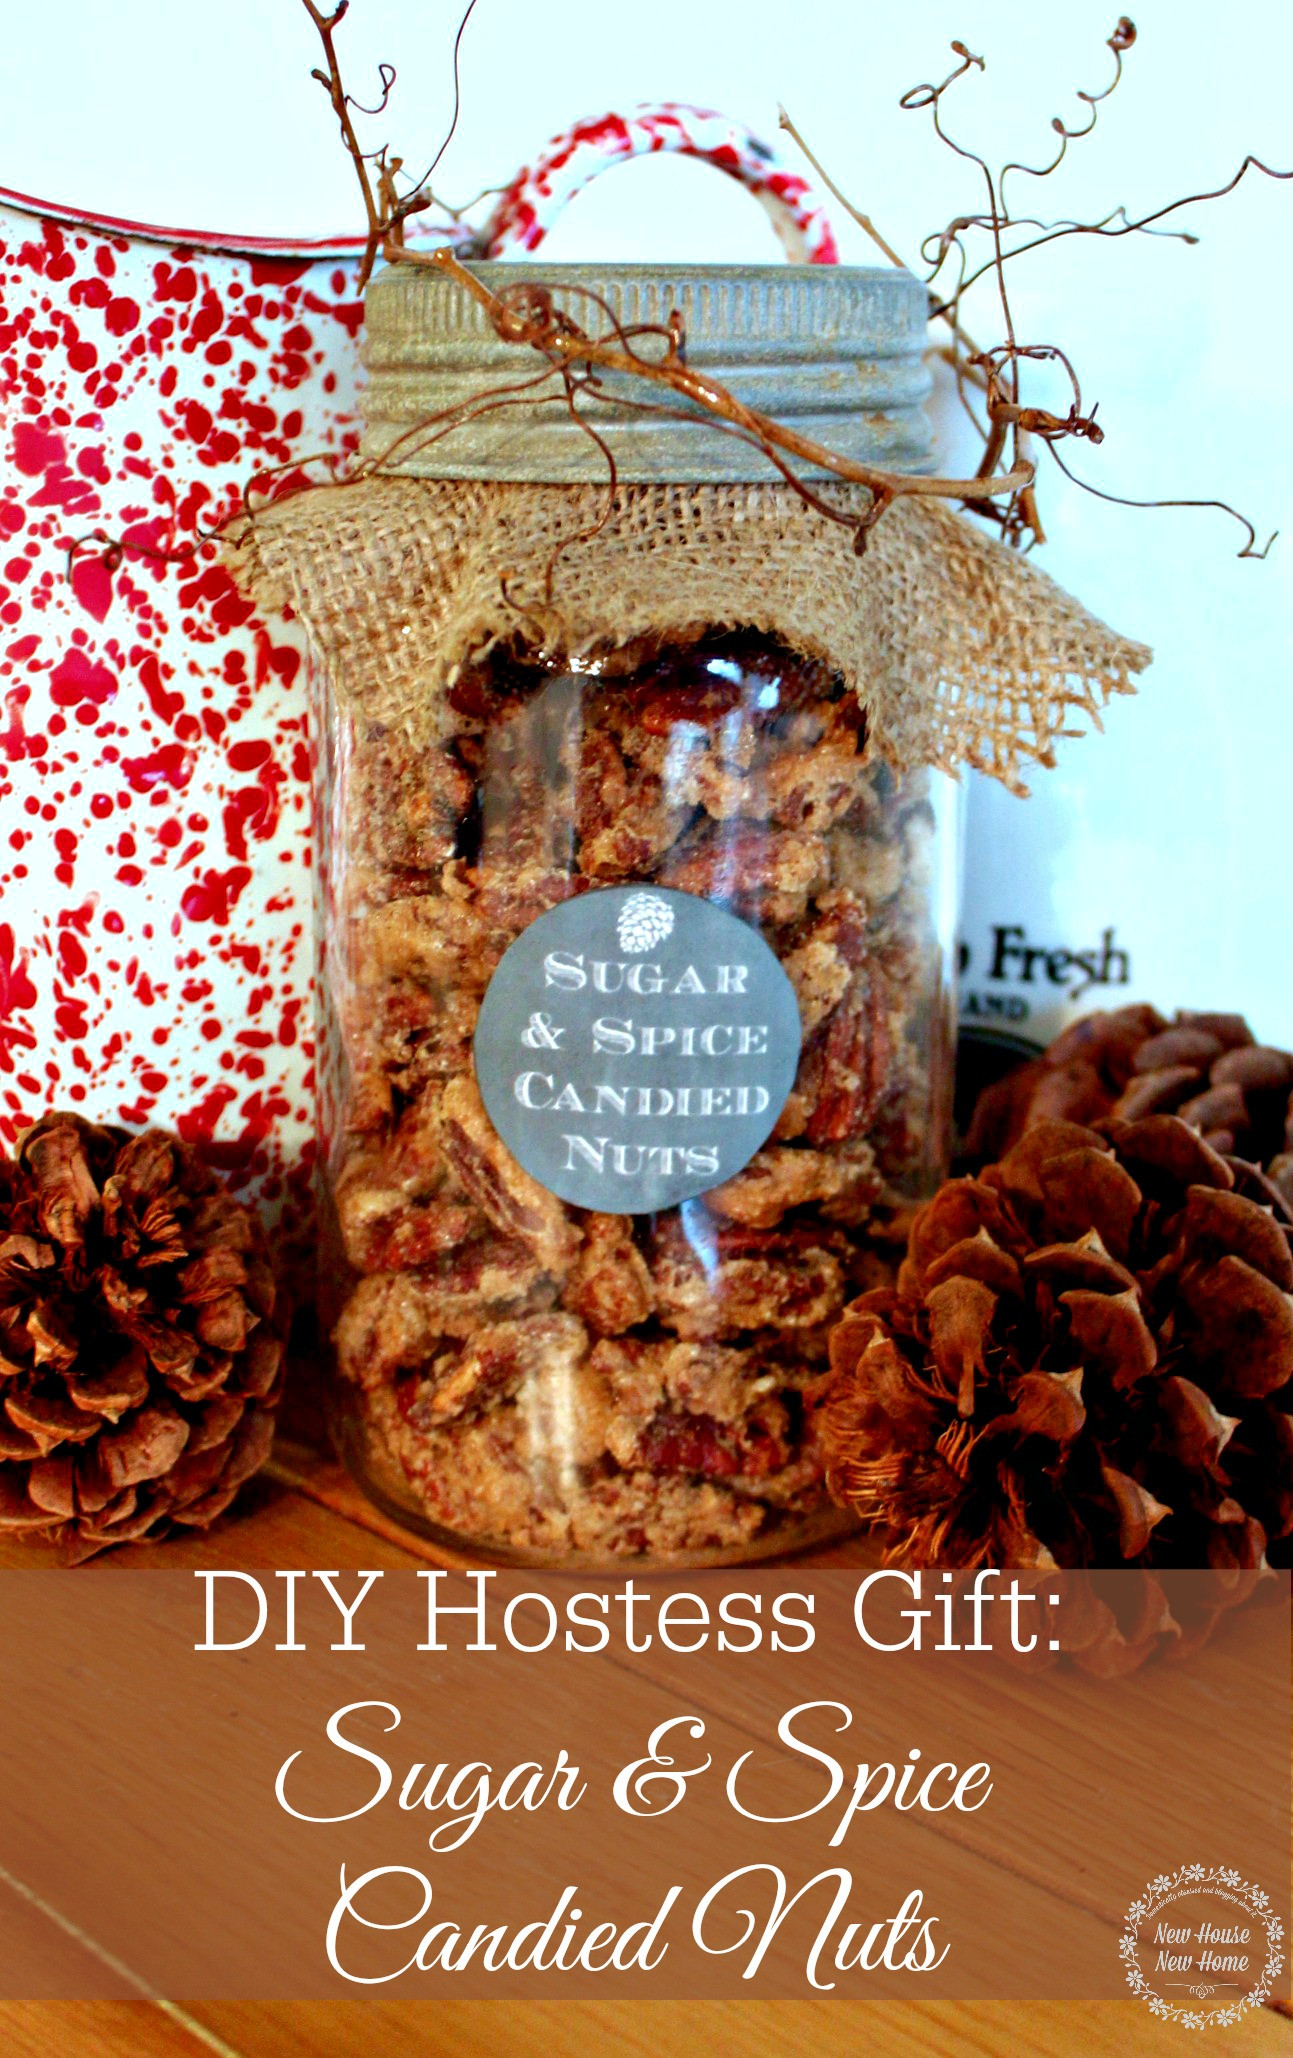 Holiday Host Gift Ideas
 DIY Holiday Hostess Gifts Sugar and Spiced Nuts New